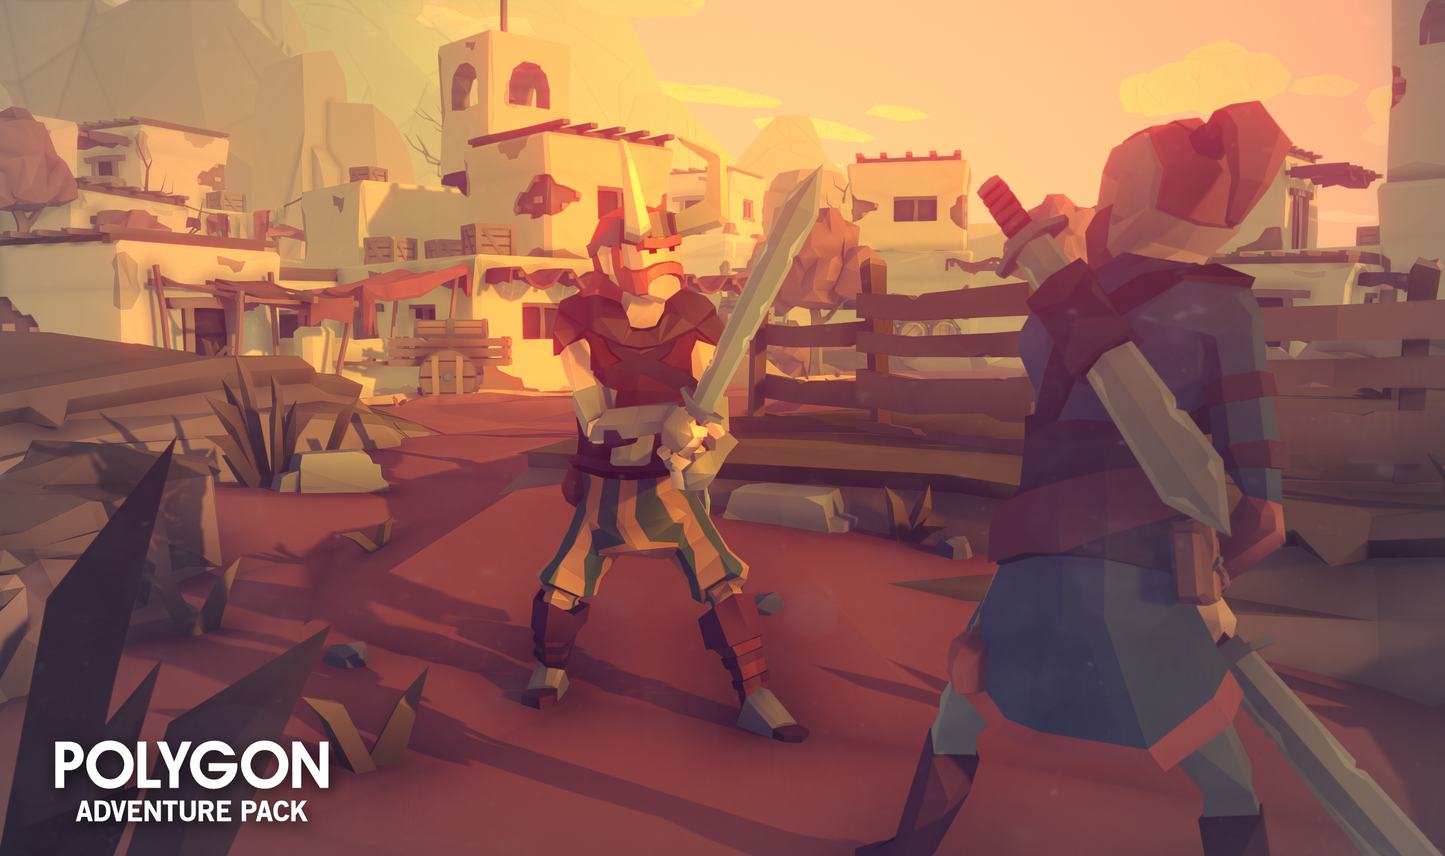 Two low poly characters fighting with swords